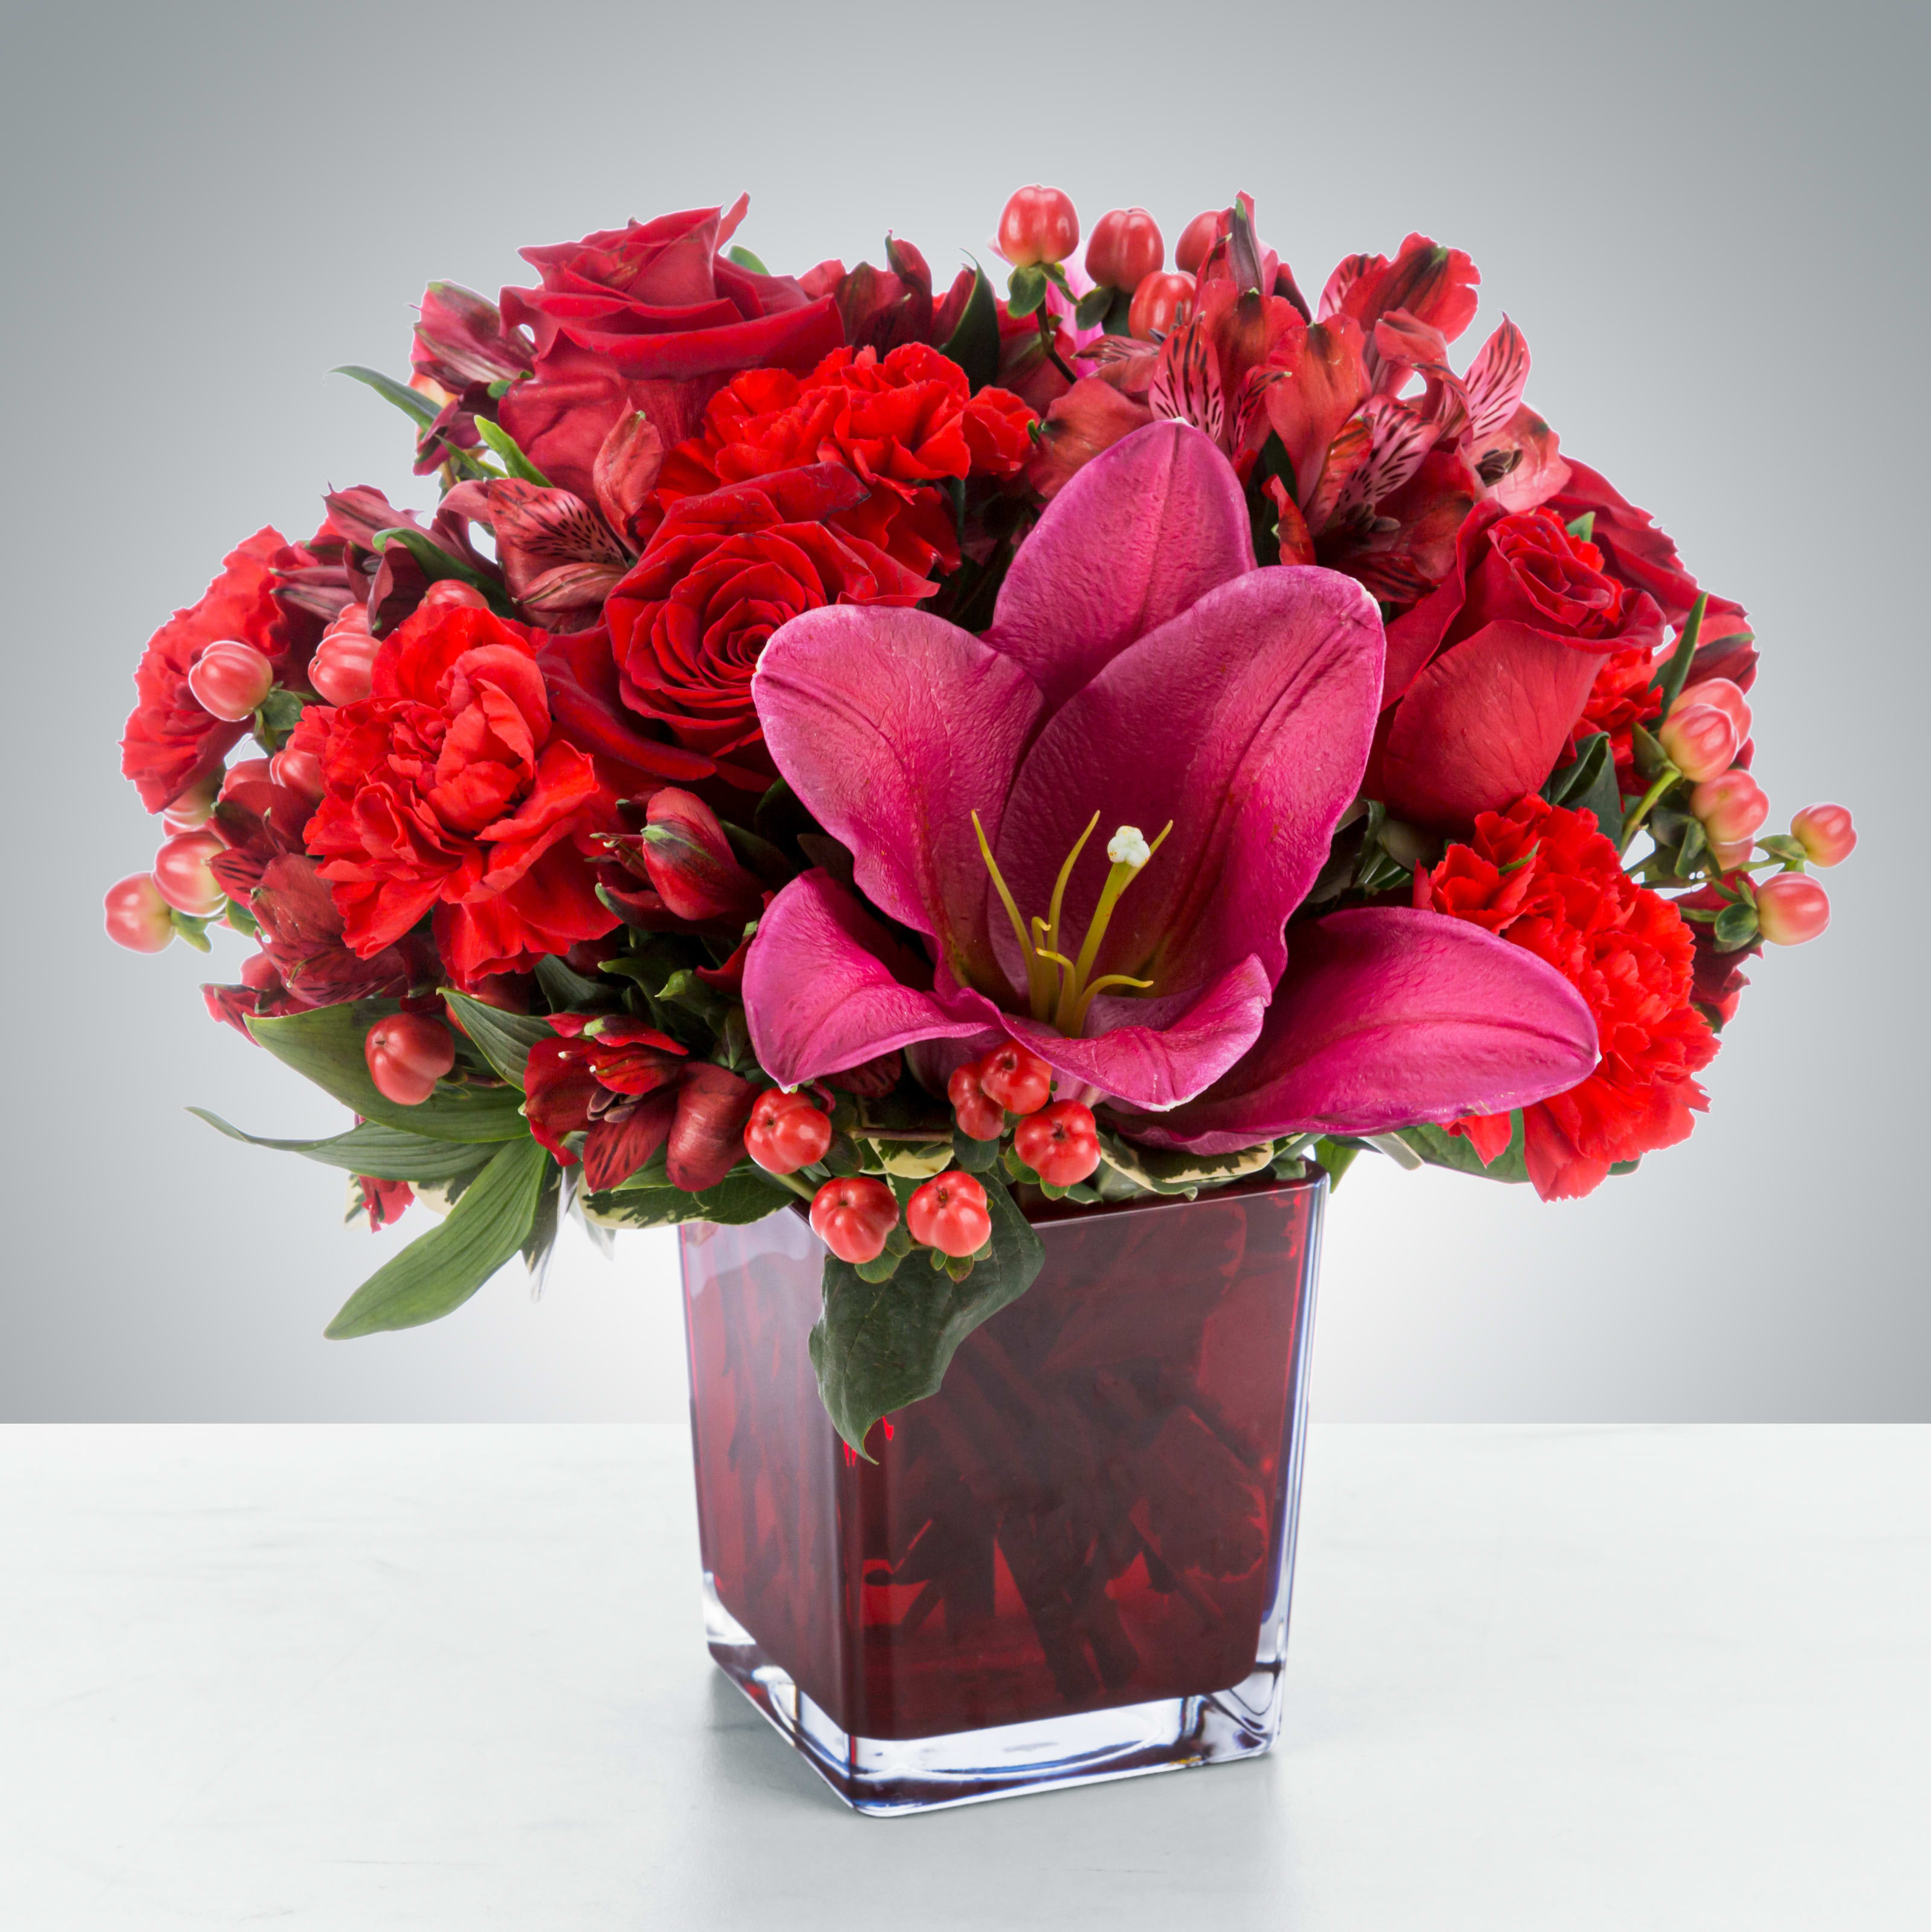 V138 - a low compact arrangement of red and pink flowers such as roses, carnations, lilies and other flowers. 